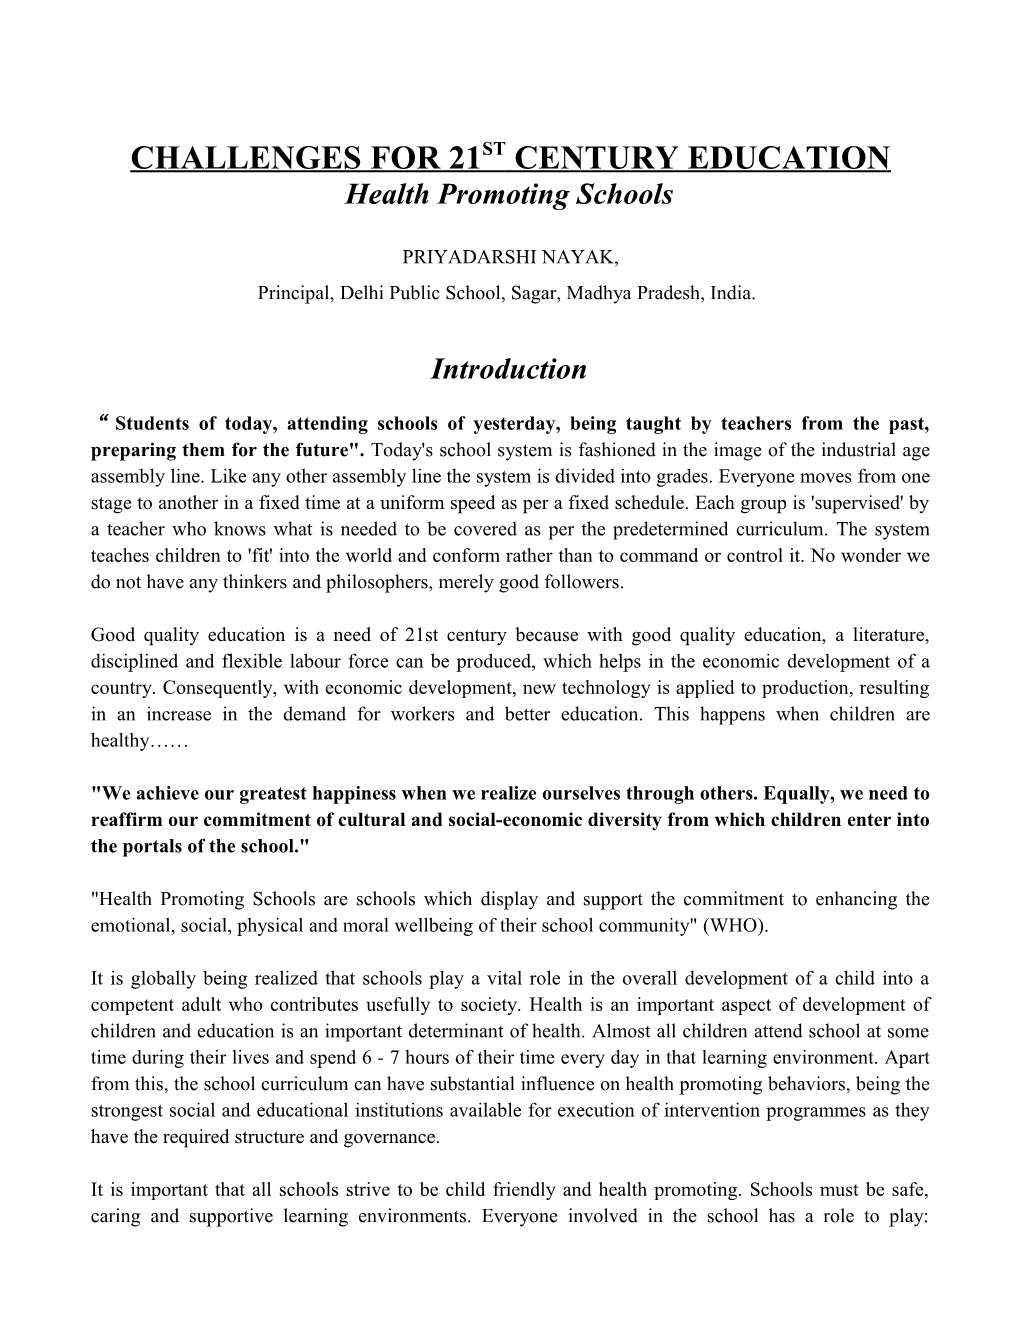 Challenges for 21St Century Education